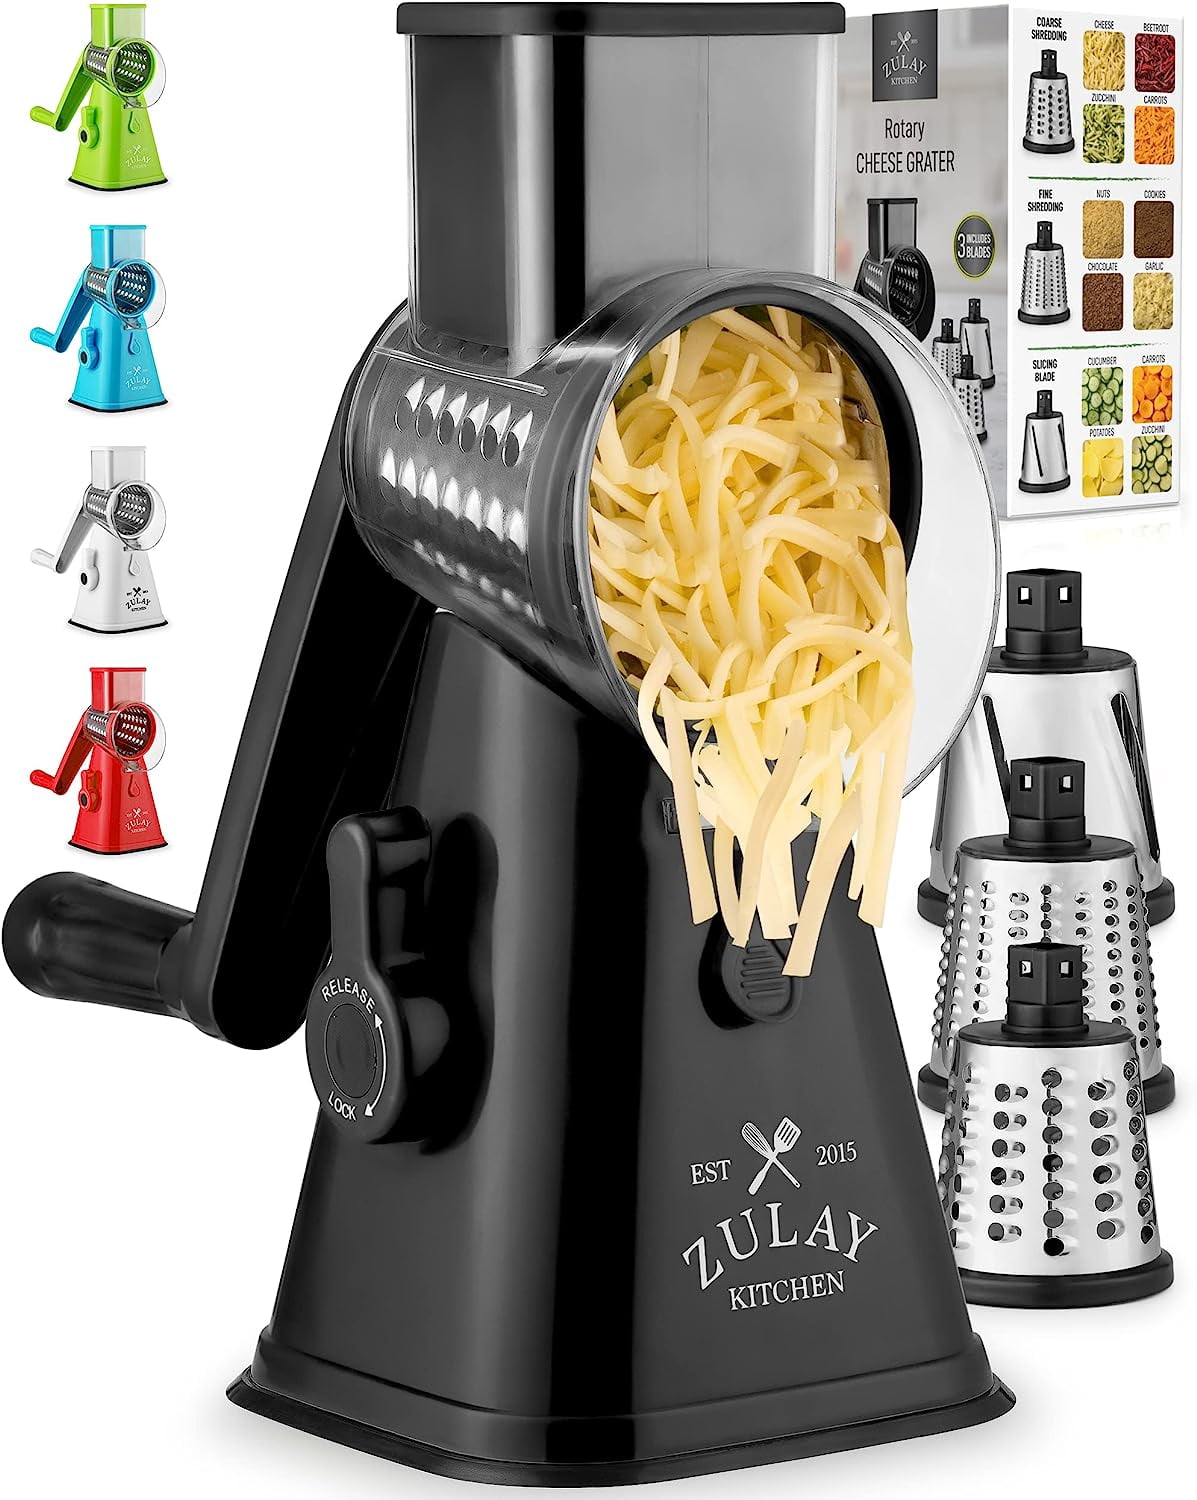 Zulay Kitchen Manual Rotary Cheese Grater with Handle - Light